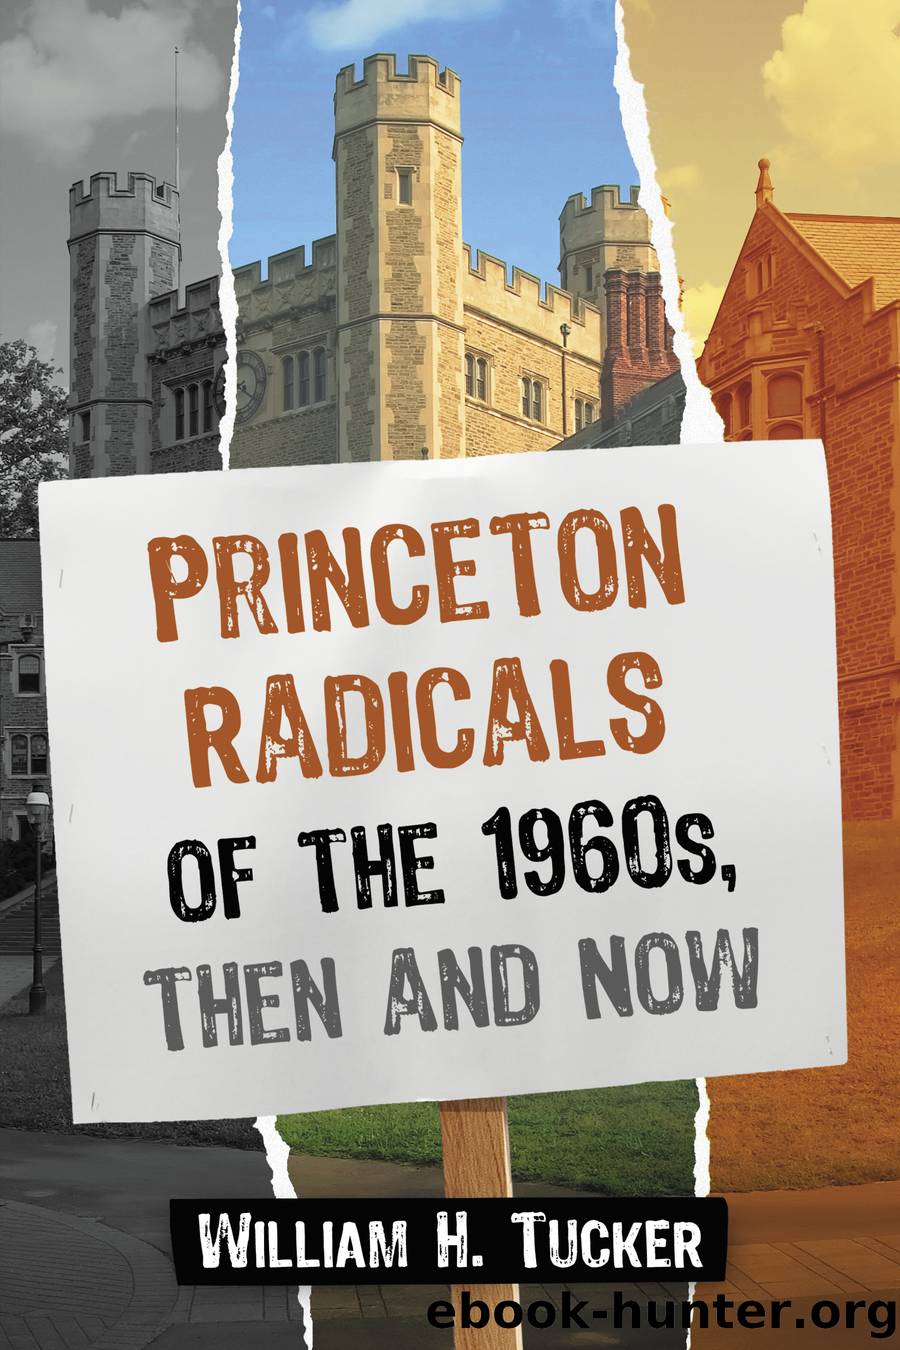 Princeton Radicals of the 1960s, Then and Now by William H. Tucker